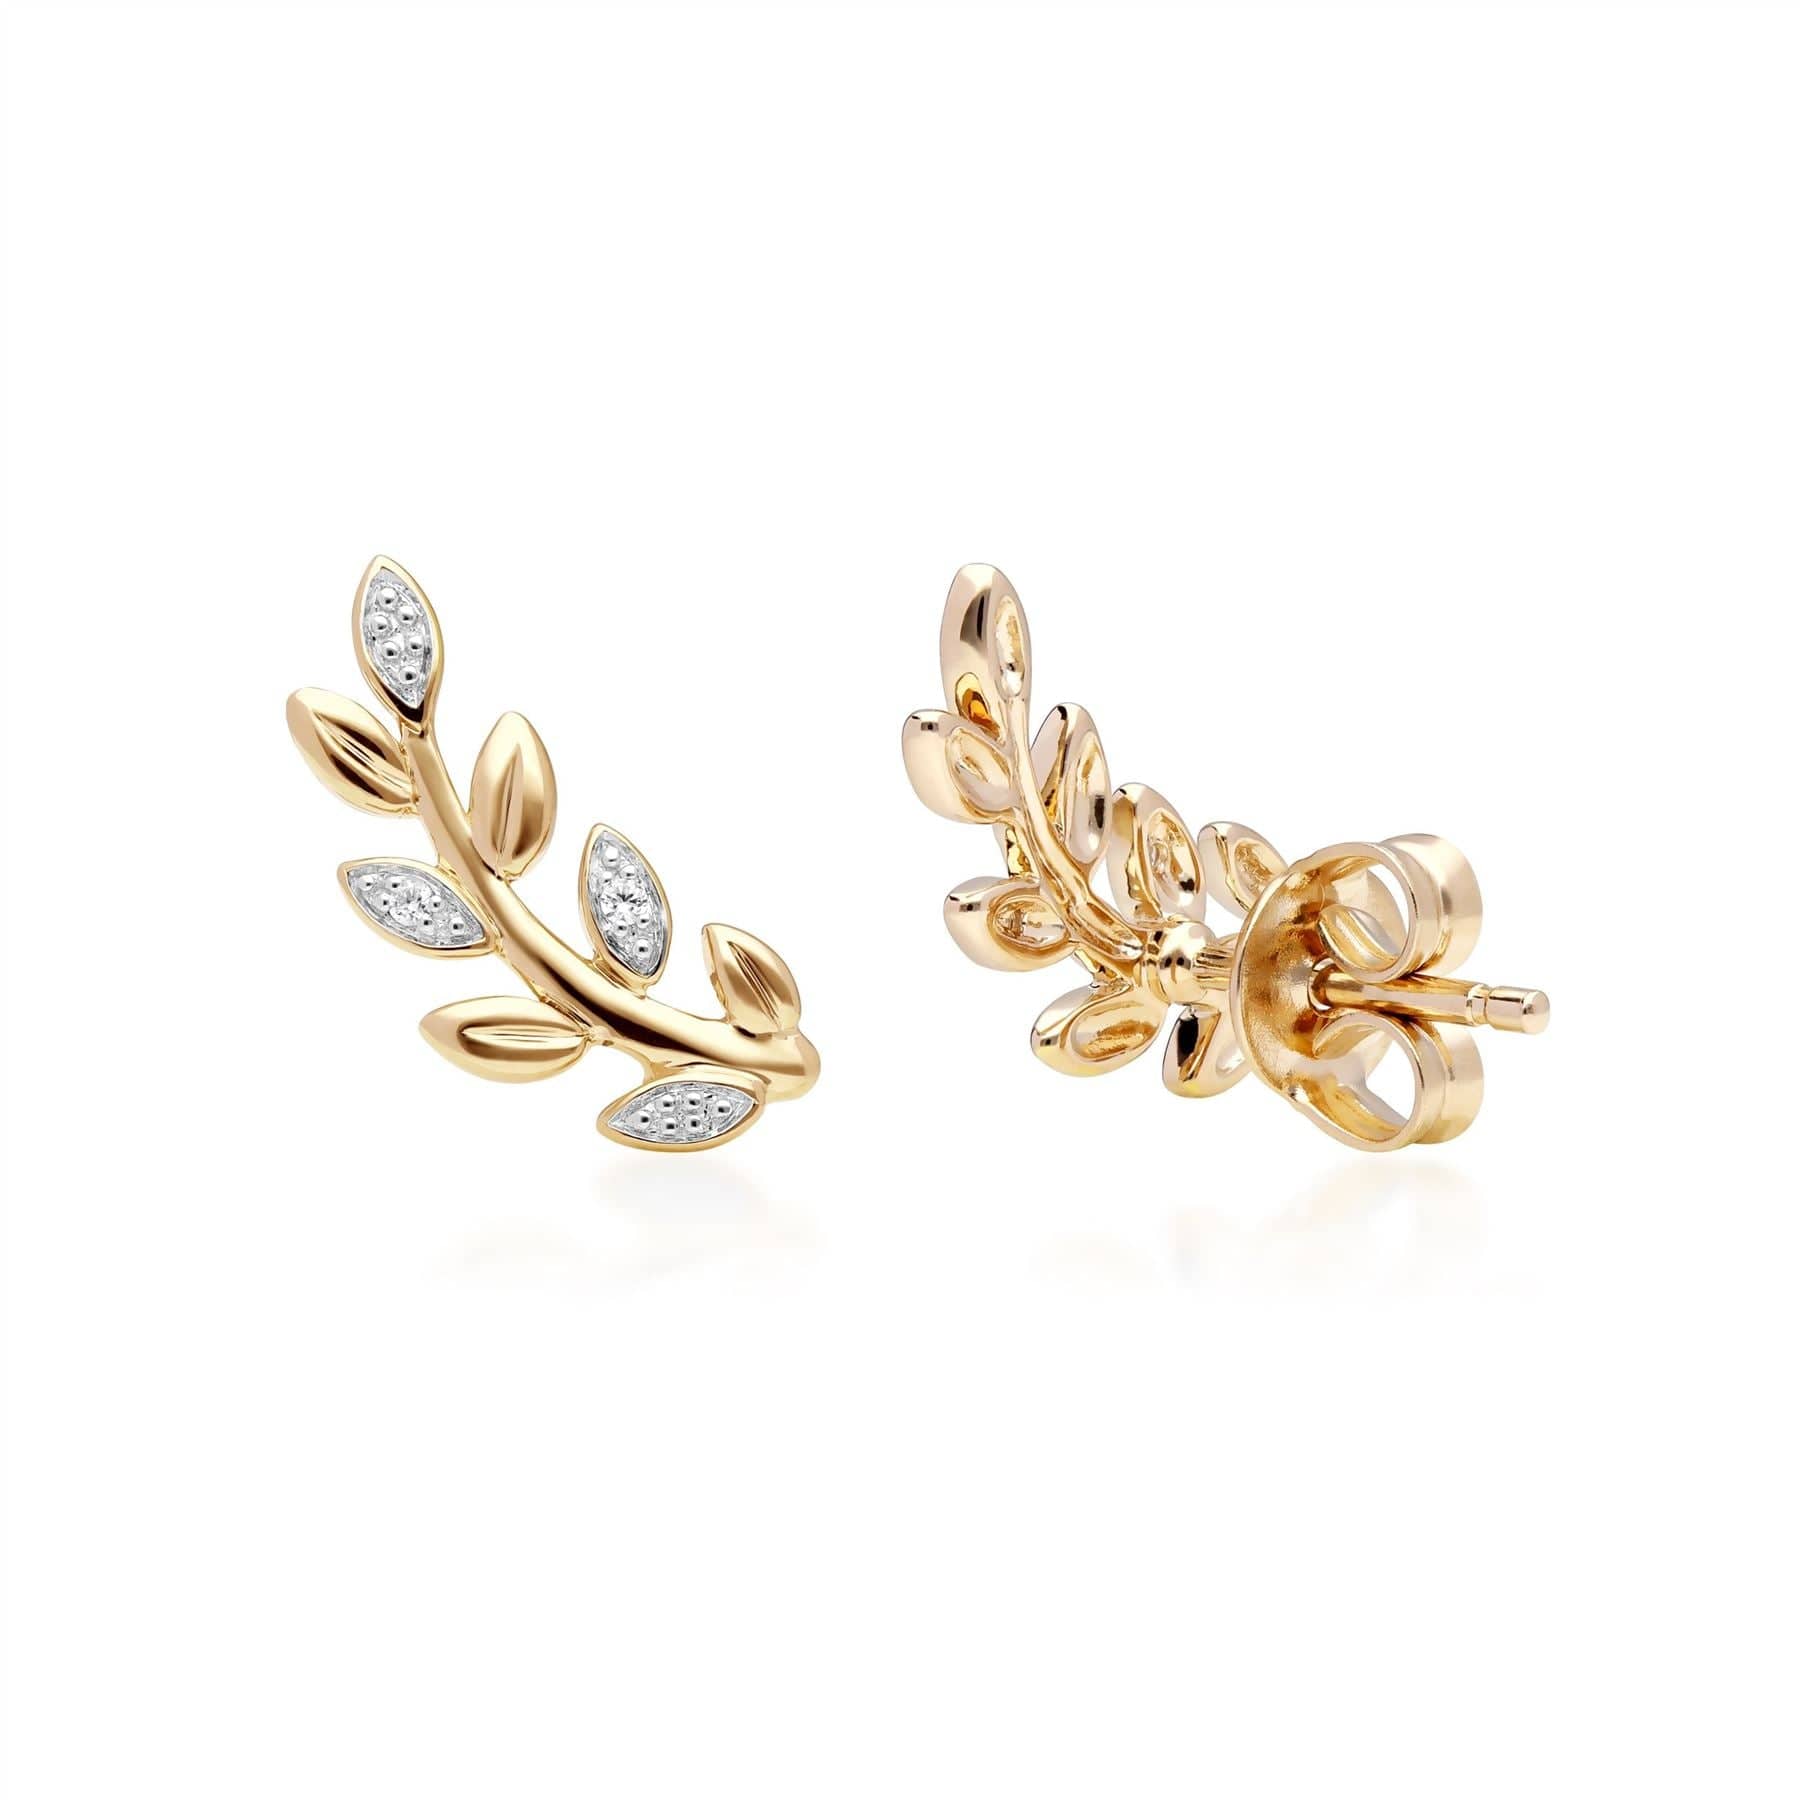 191E0403019 O Leaf Diamond Pave Stud Earrings in 9ct Yellow Gold 3